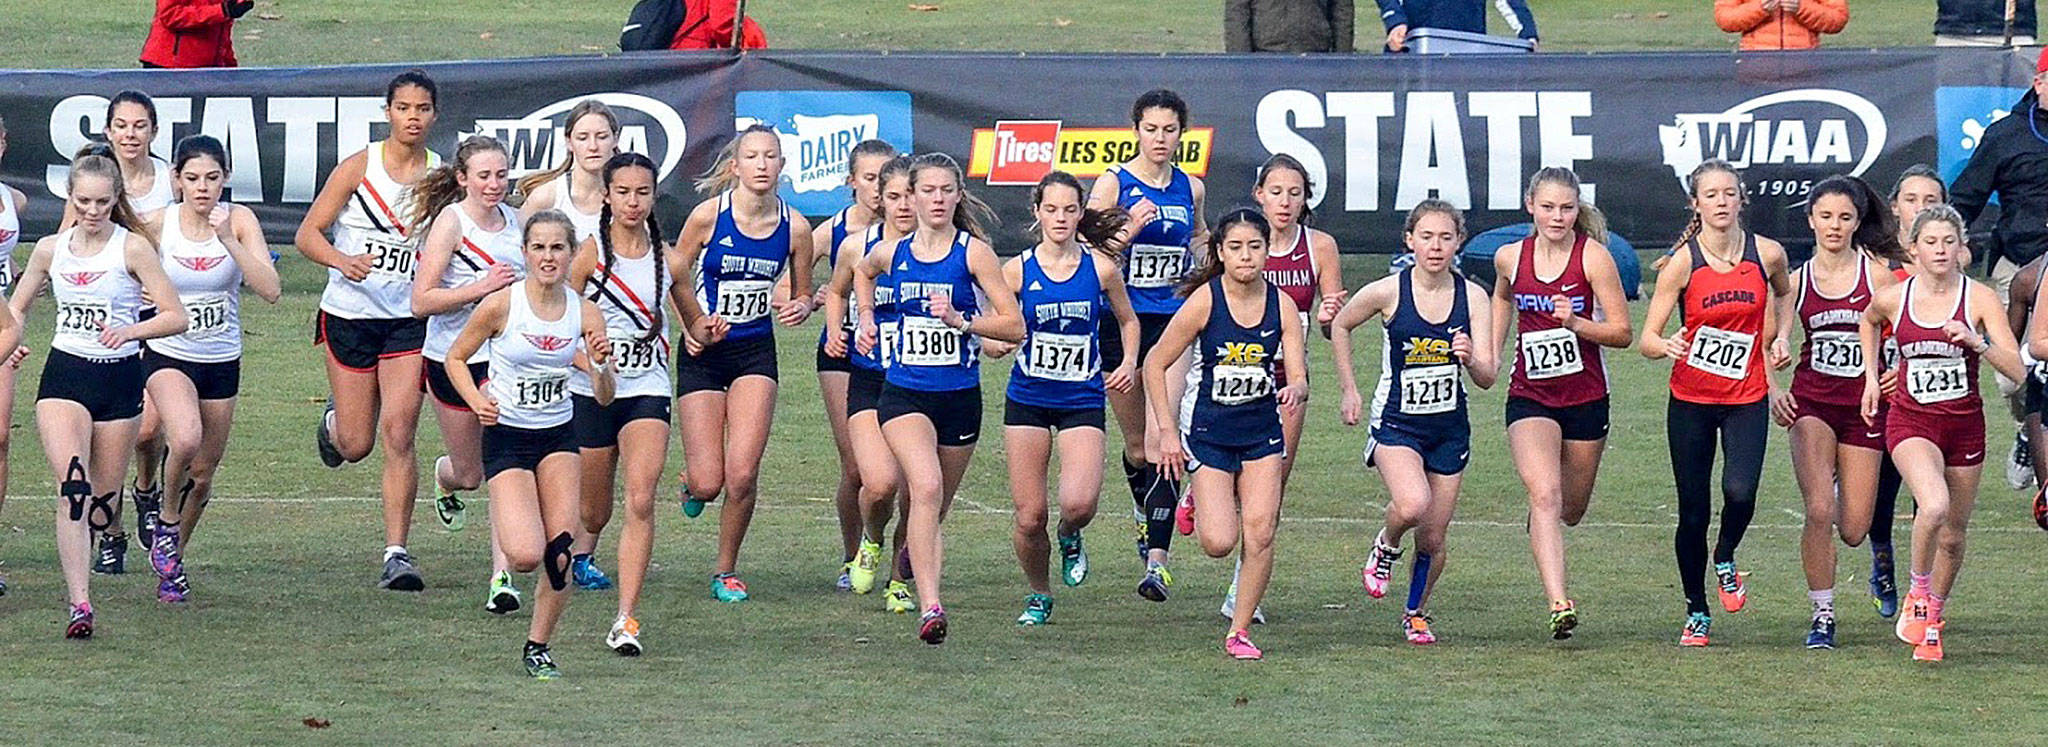 The South Whidbey girls team, center, take off at the start of last year’s state meet. The Falcons, from the left, are Laila Gmerek, Natalie Rodriguez, Grace Huffman, Kaia Swegler Richmond, Jasmin Graner and Flannery Friedman. (Photo by Karen Swegler)